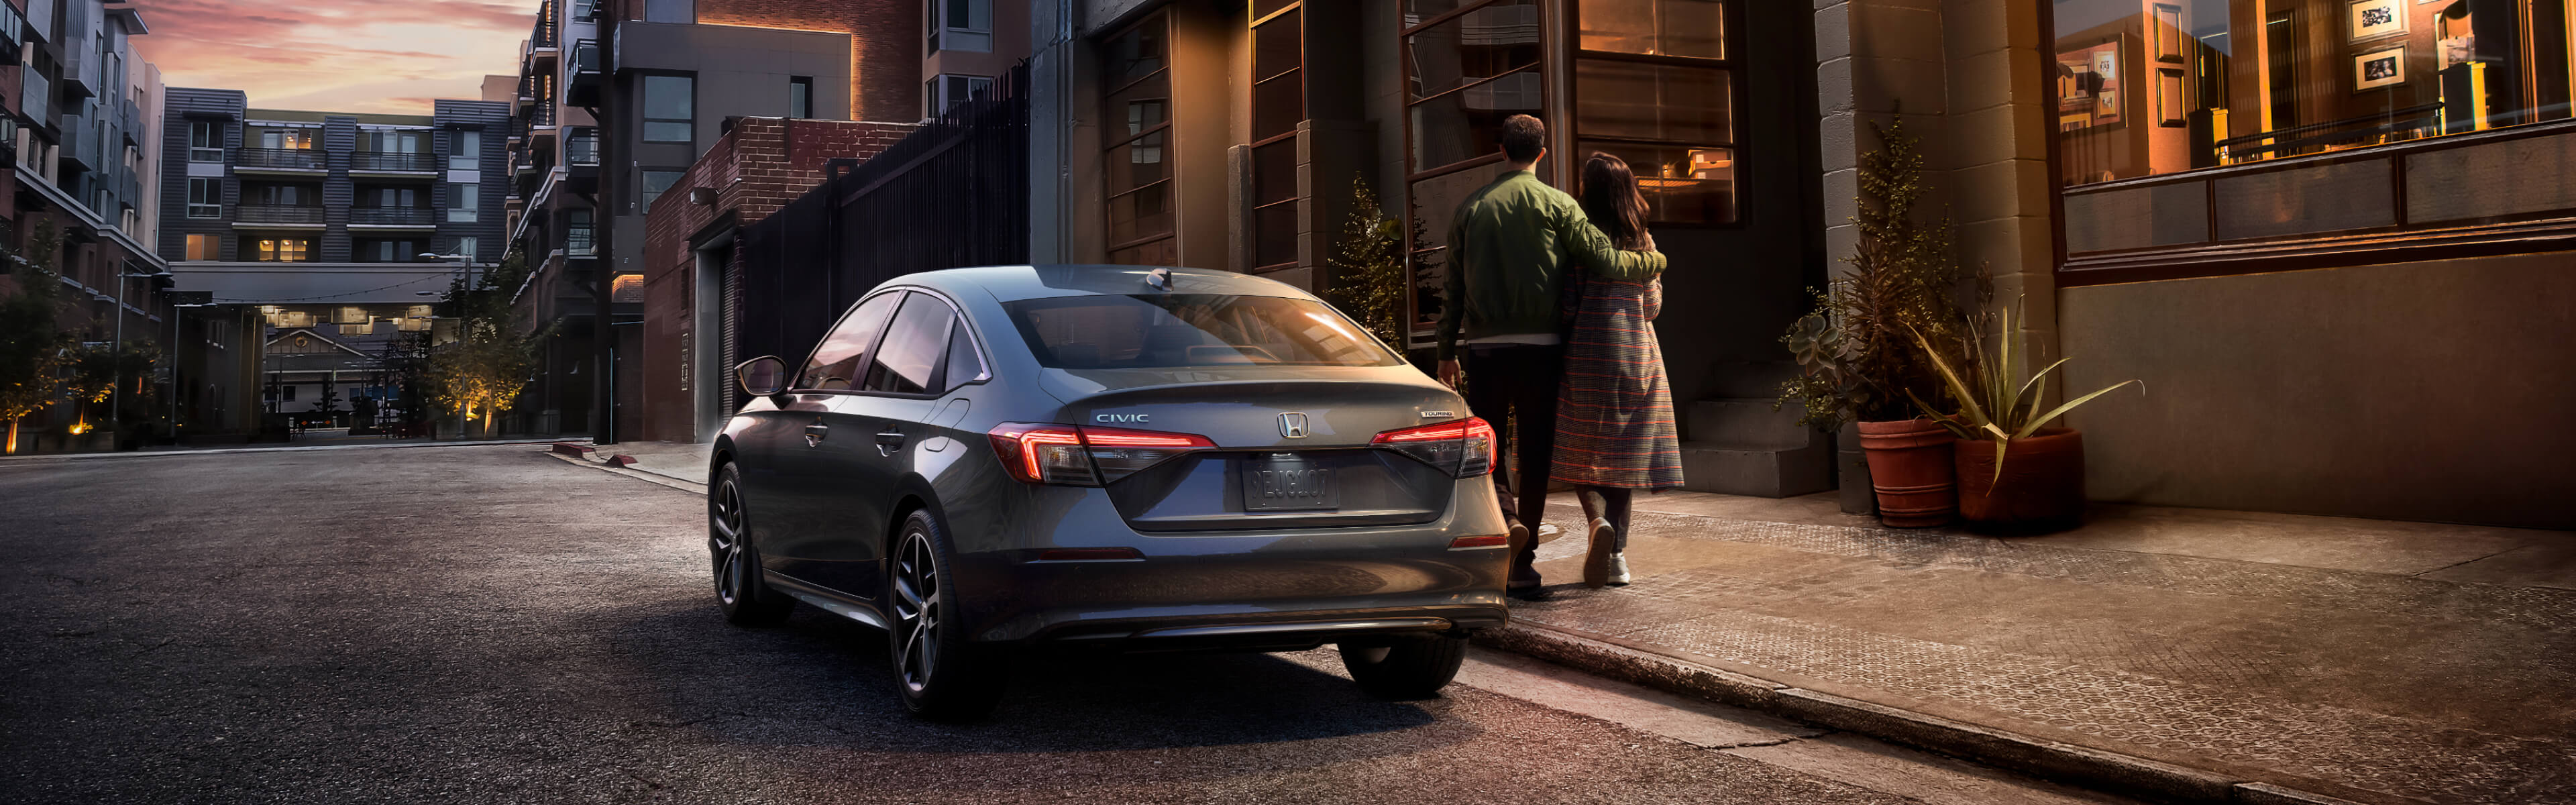 Rear view of a grey 2022 Honda Civic parked on a residential city block in the early evening, with a couple walking away in an embrace.